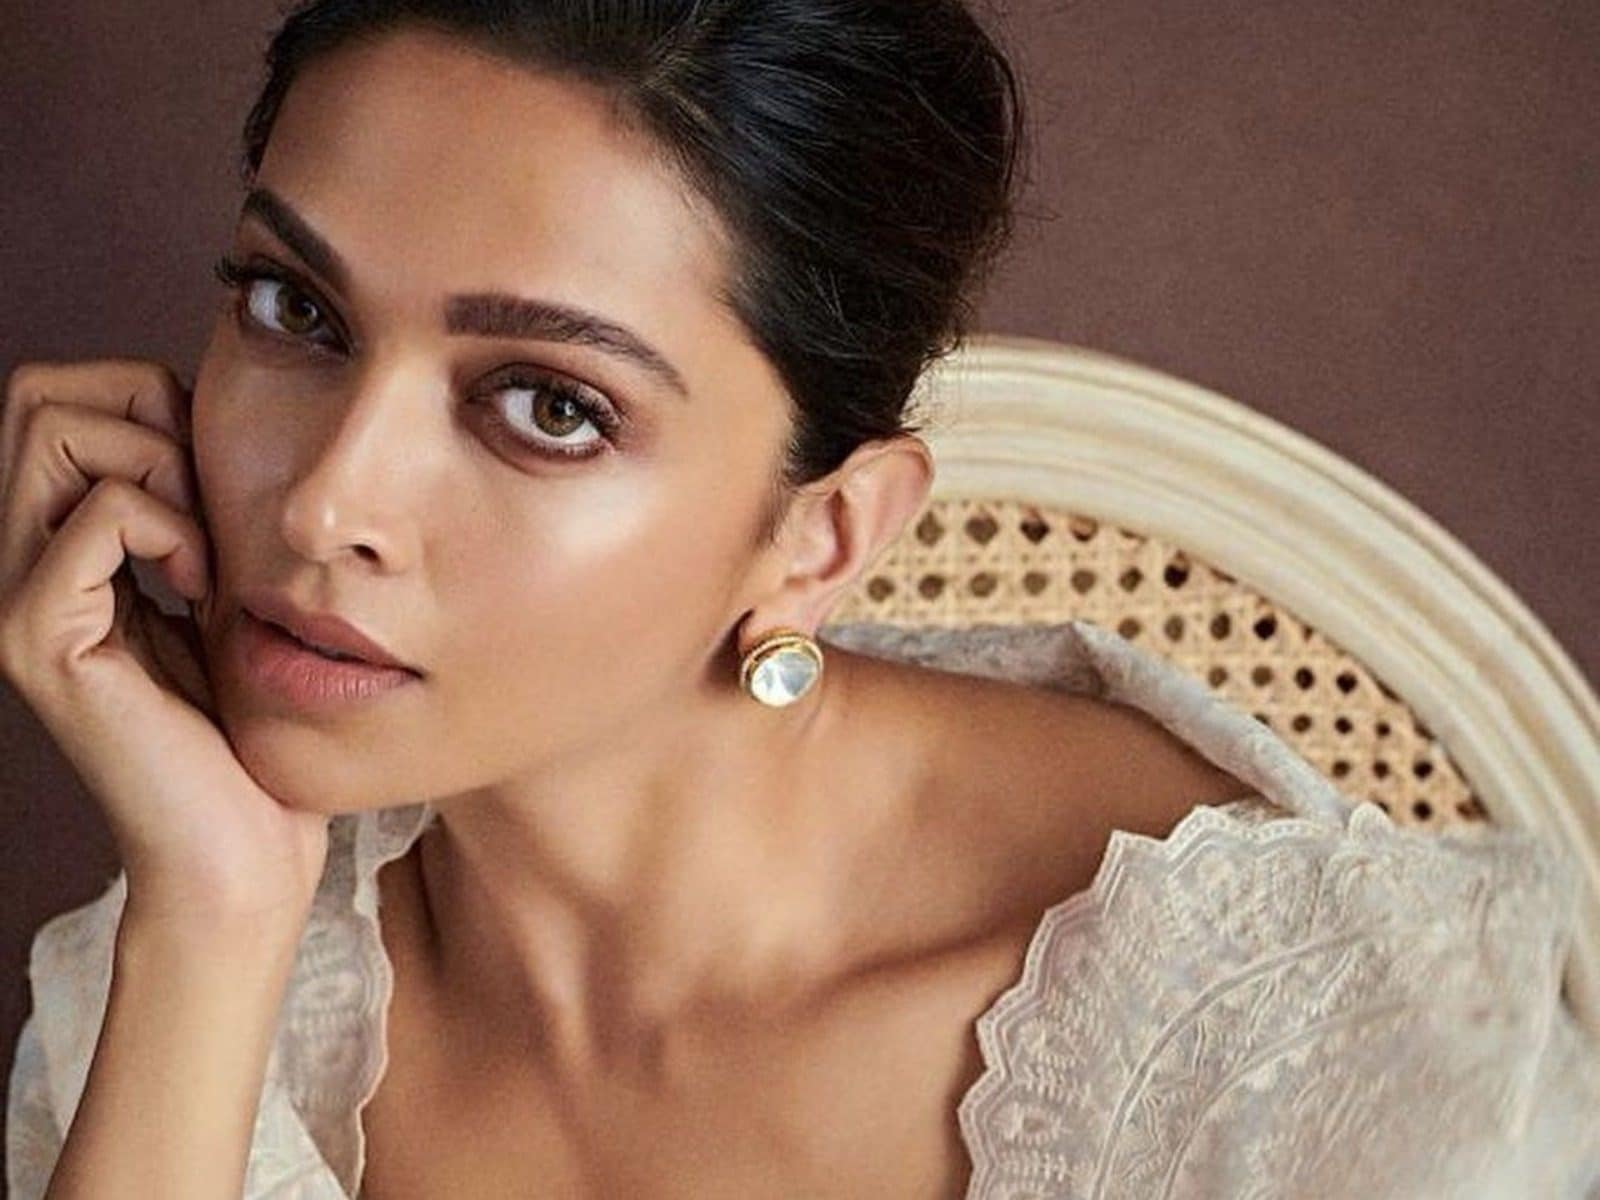 John Abraham Xxxx Videos - Deepika Padukone to Attend Met Gala 2022 with Louis Vuitton? Here's What We  Know